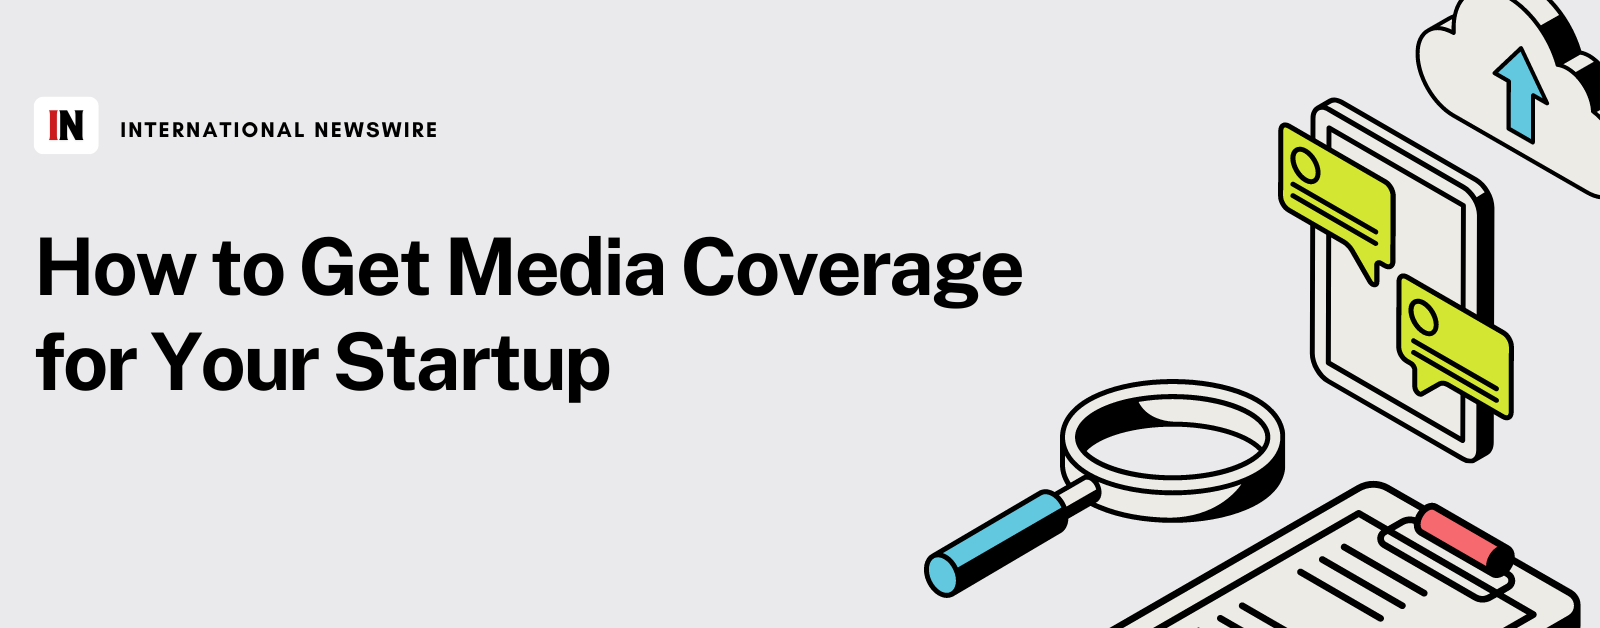 How to Get Media Coverage for Your Startup